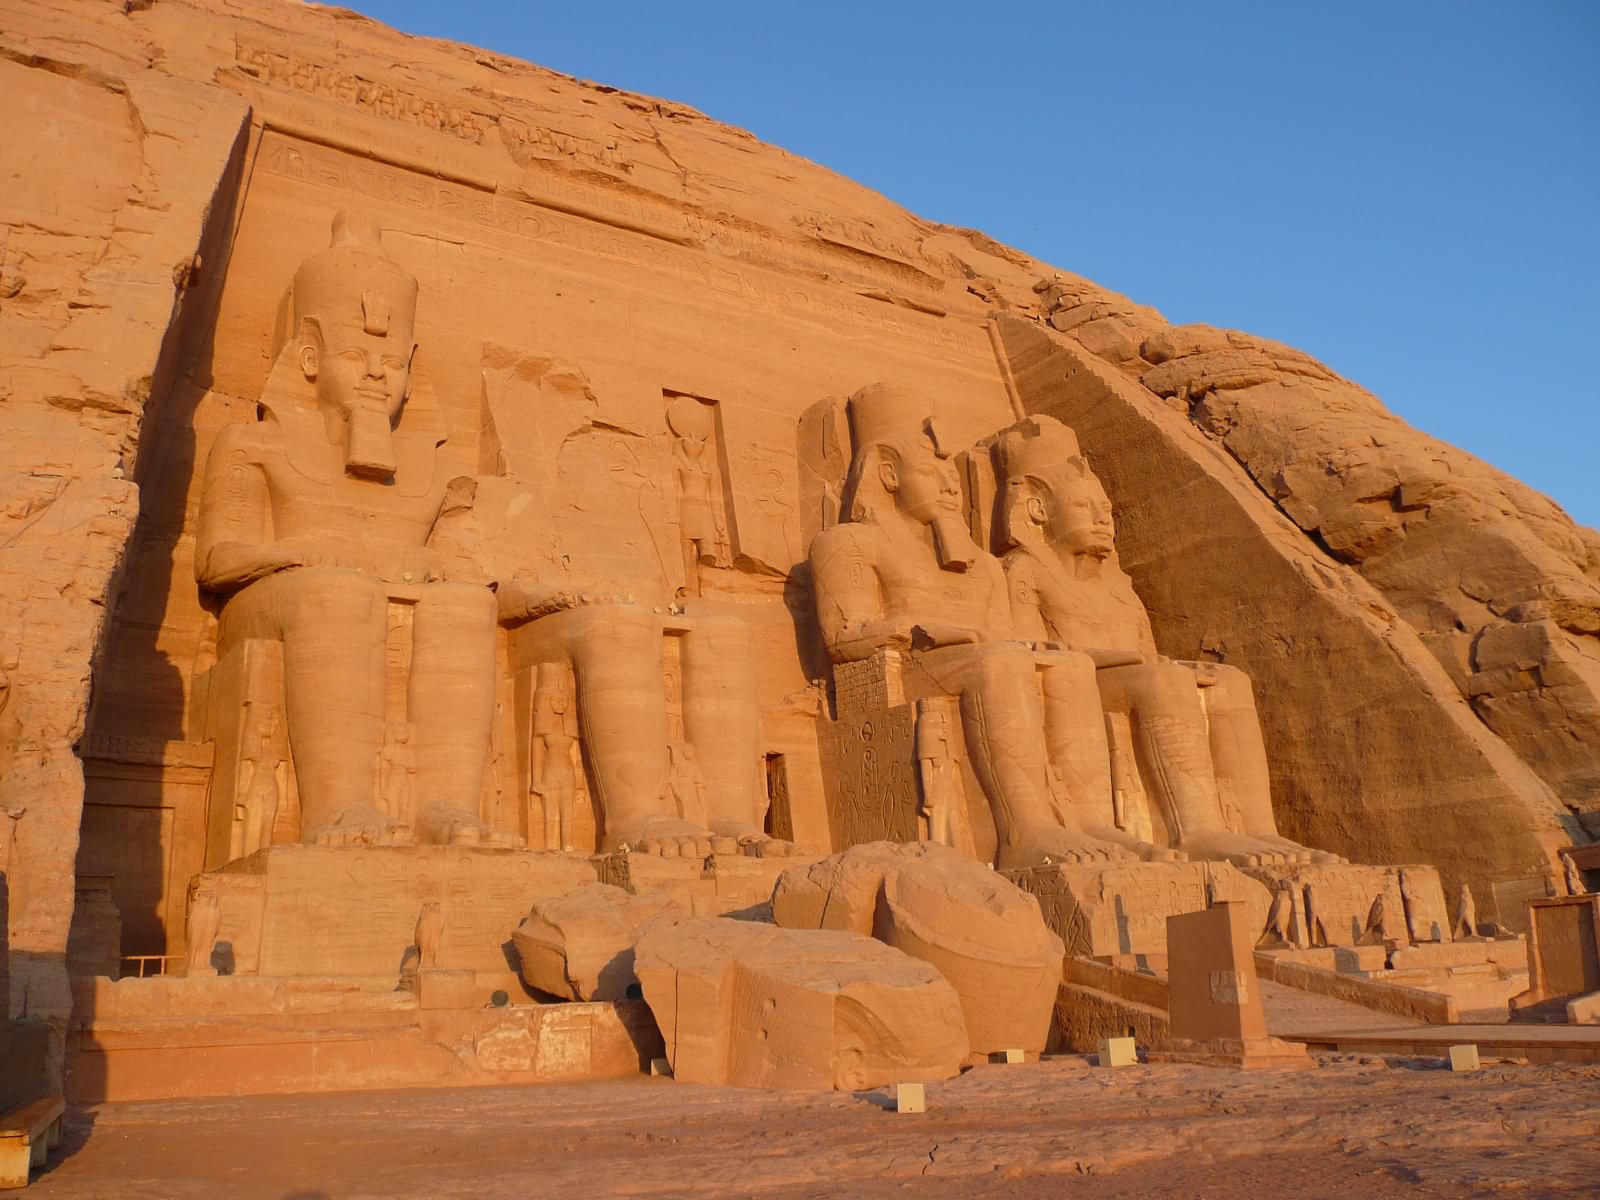 Ramesses II Statues In Front Of Abu Simbel Temple, Egypt